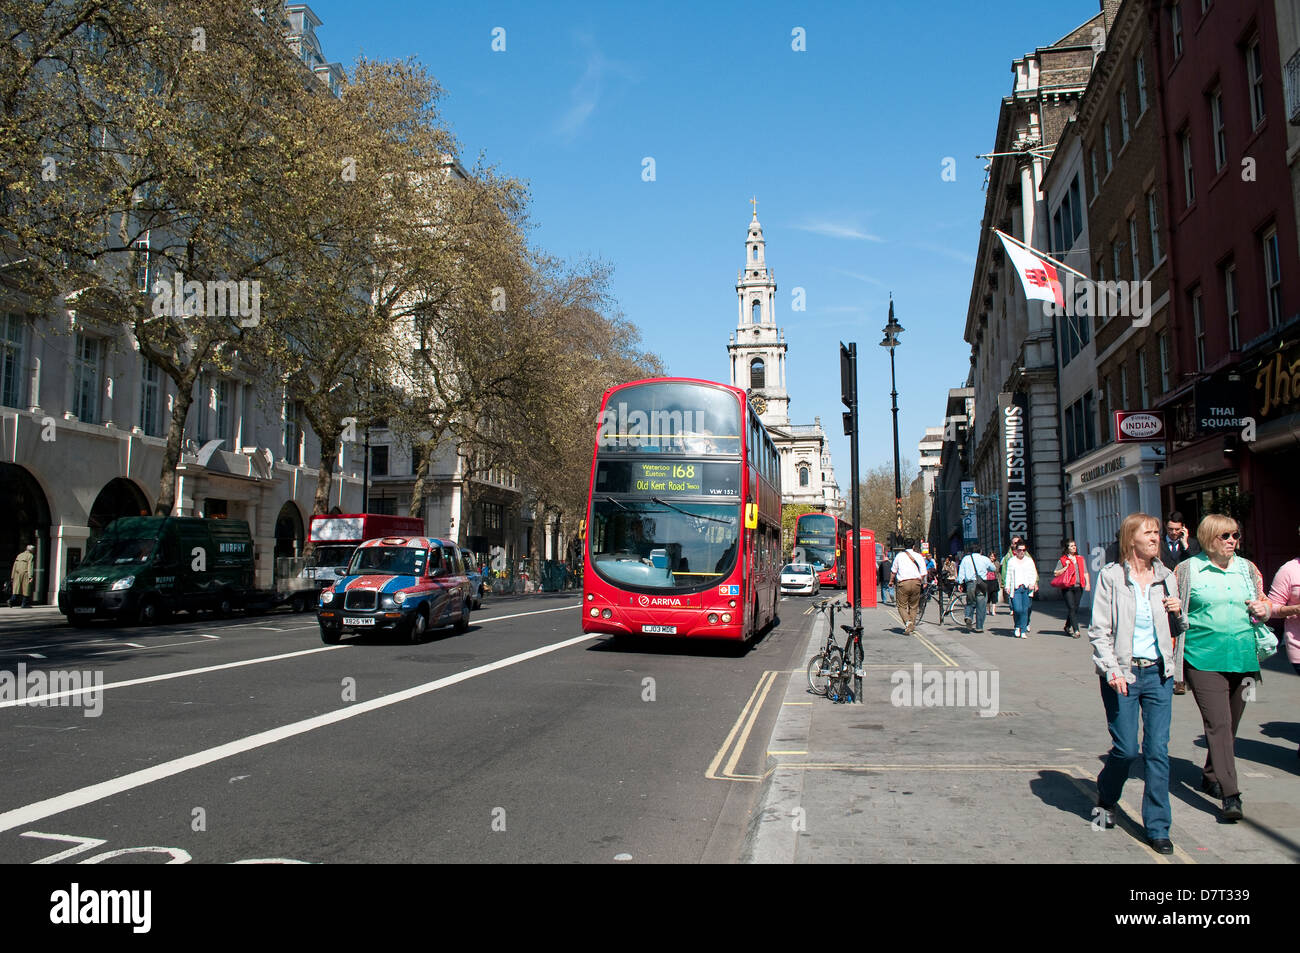 Bus and people on the Strand, London, UK Stock Photo